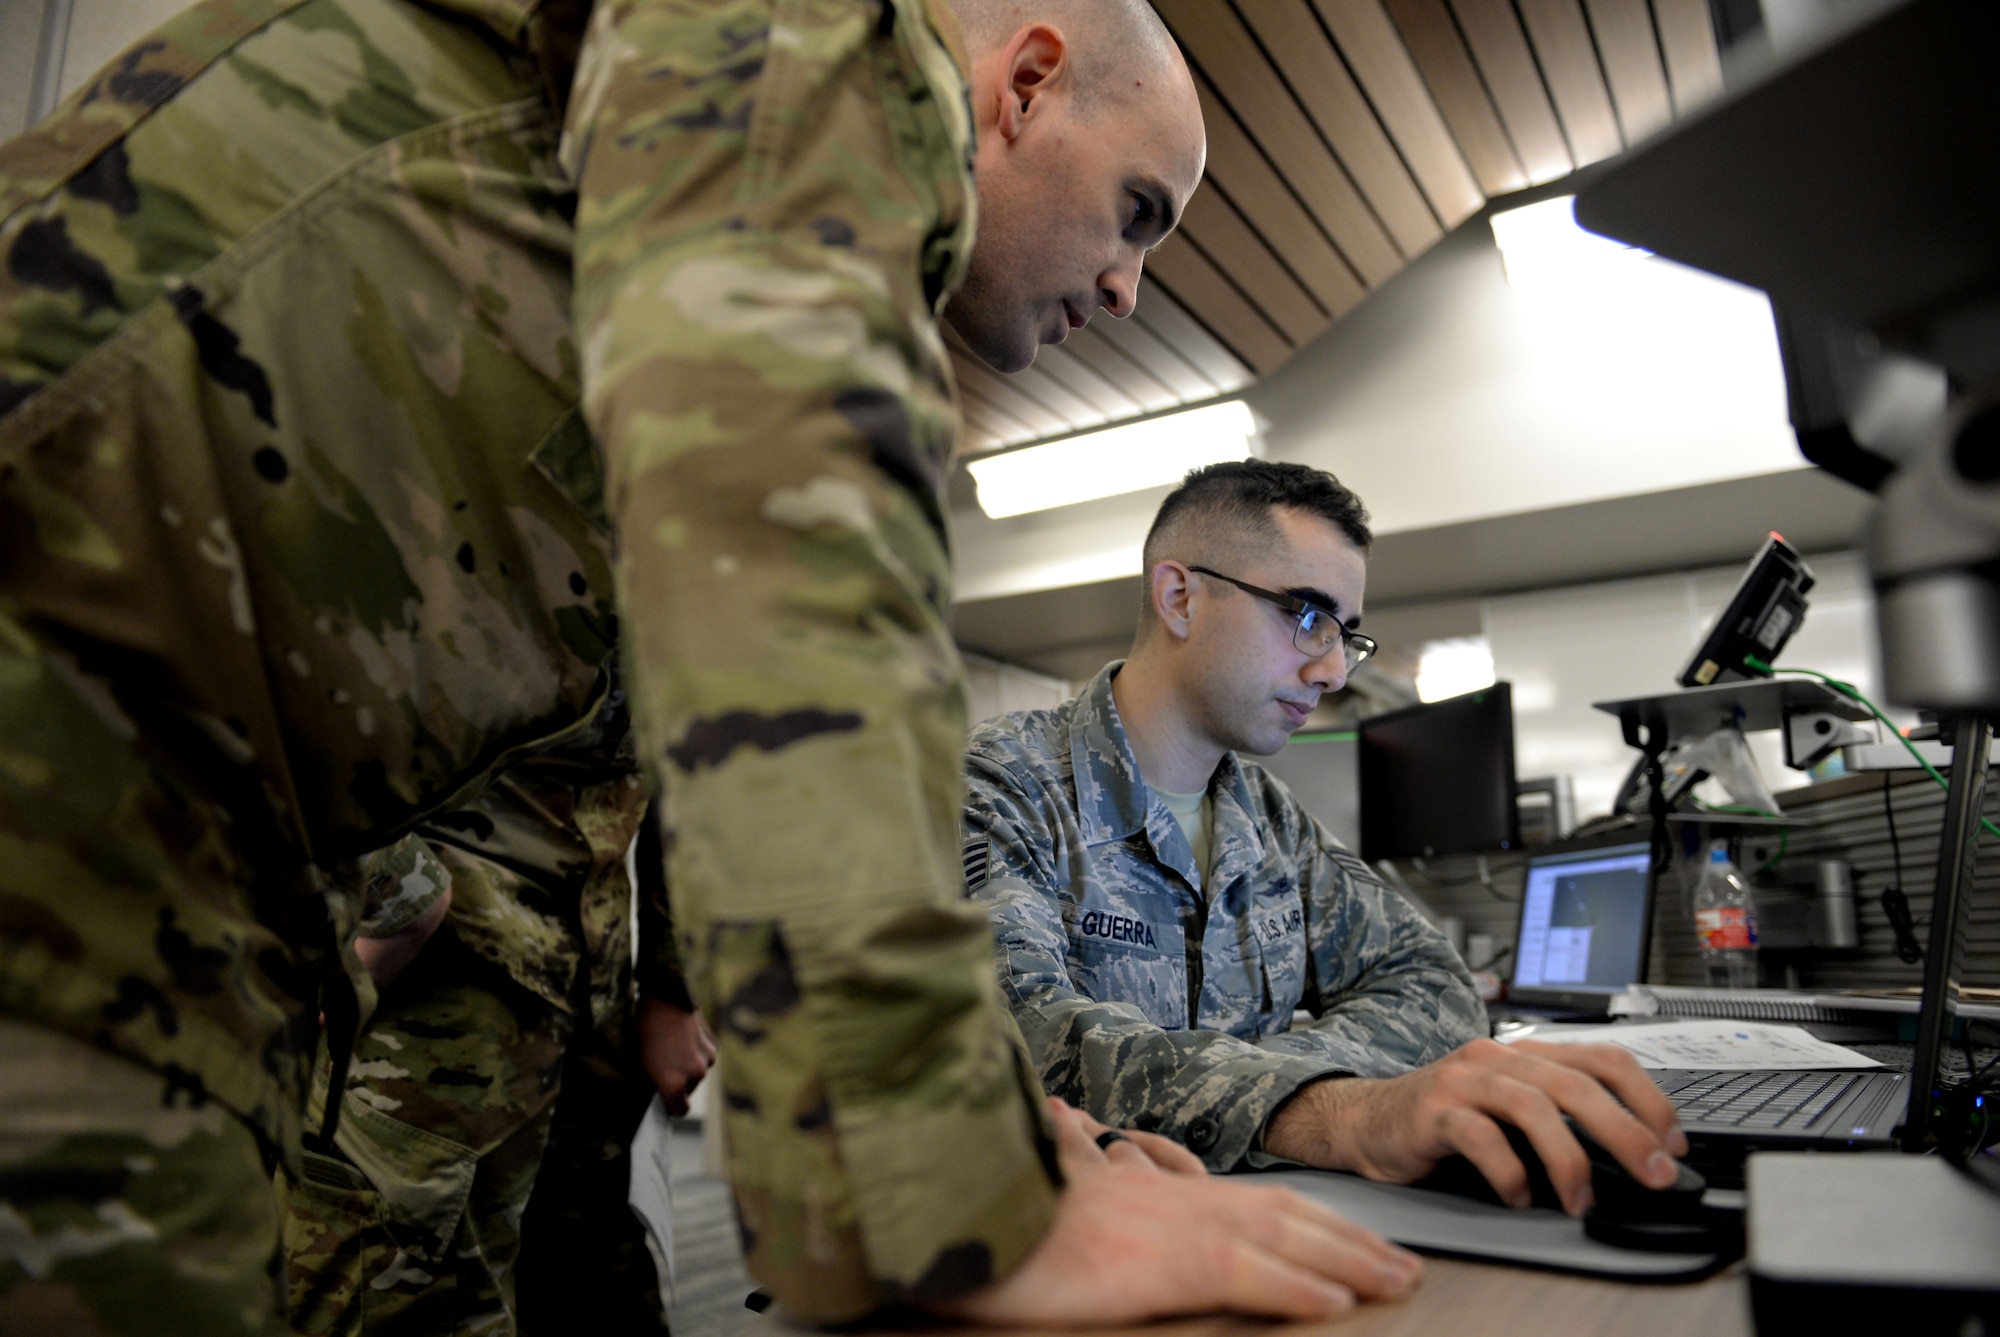 Members of the 834th Cyberspace Operations Squadron participate in the monthly 567th Cyberspace Operations Group “hunt exercise” at Joint Base San Antonio-Lackland, Texas, March 21, 2019. The three-day exercise afforded teams from the 90th, 92nd, 833rd and 834th COSs, as well as the Air Force Office of Special Investigations, the opportunity to defend against an enemy within a virtual training network. (U.S. Air Force photo by Tech. Sgt. R.J. Biermann)